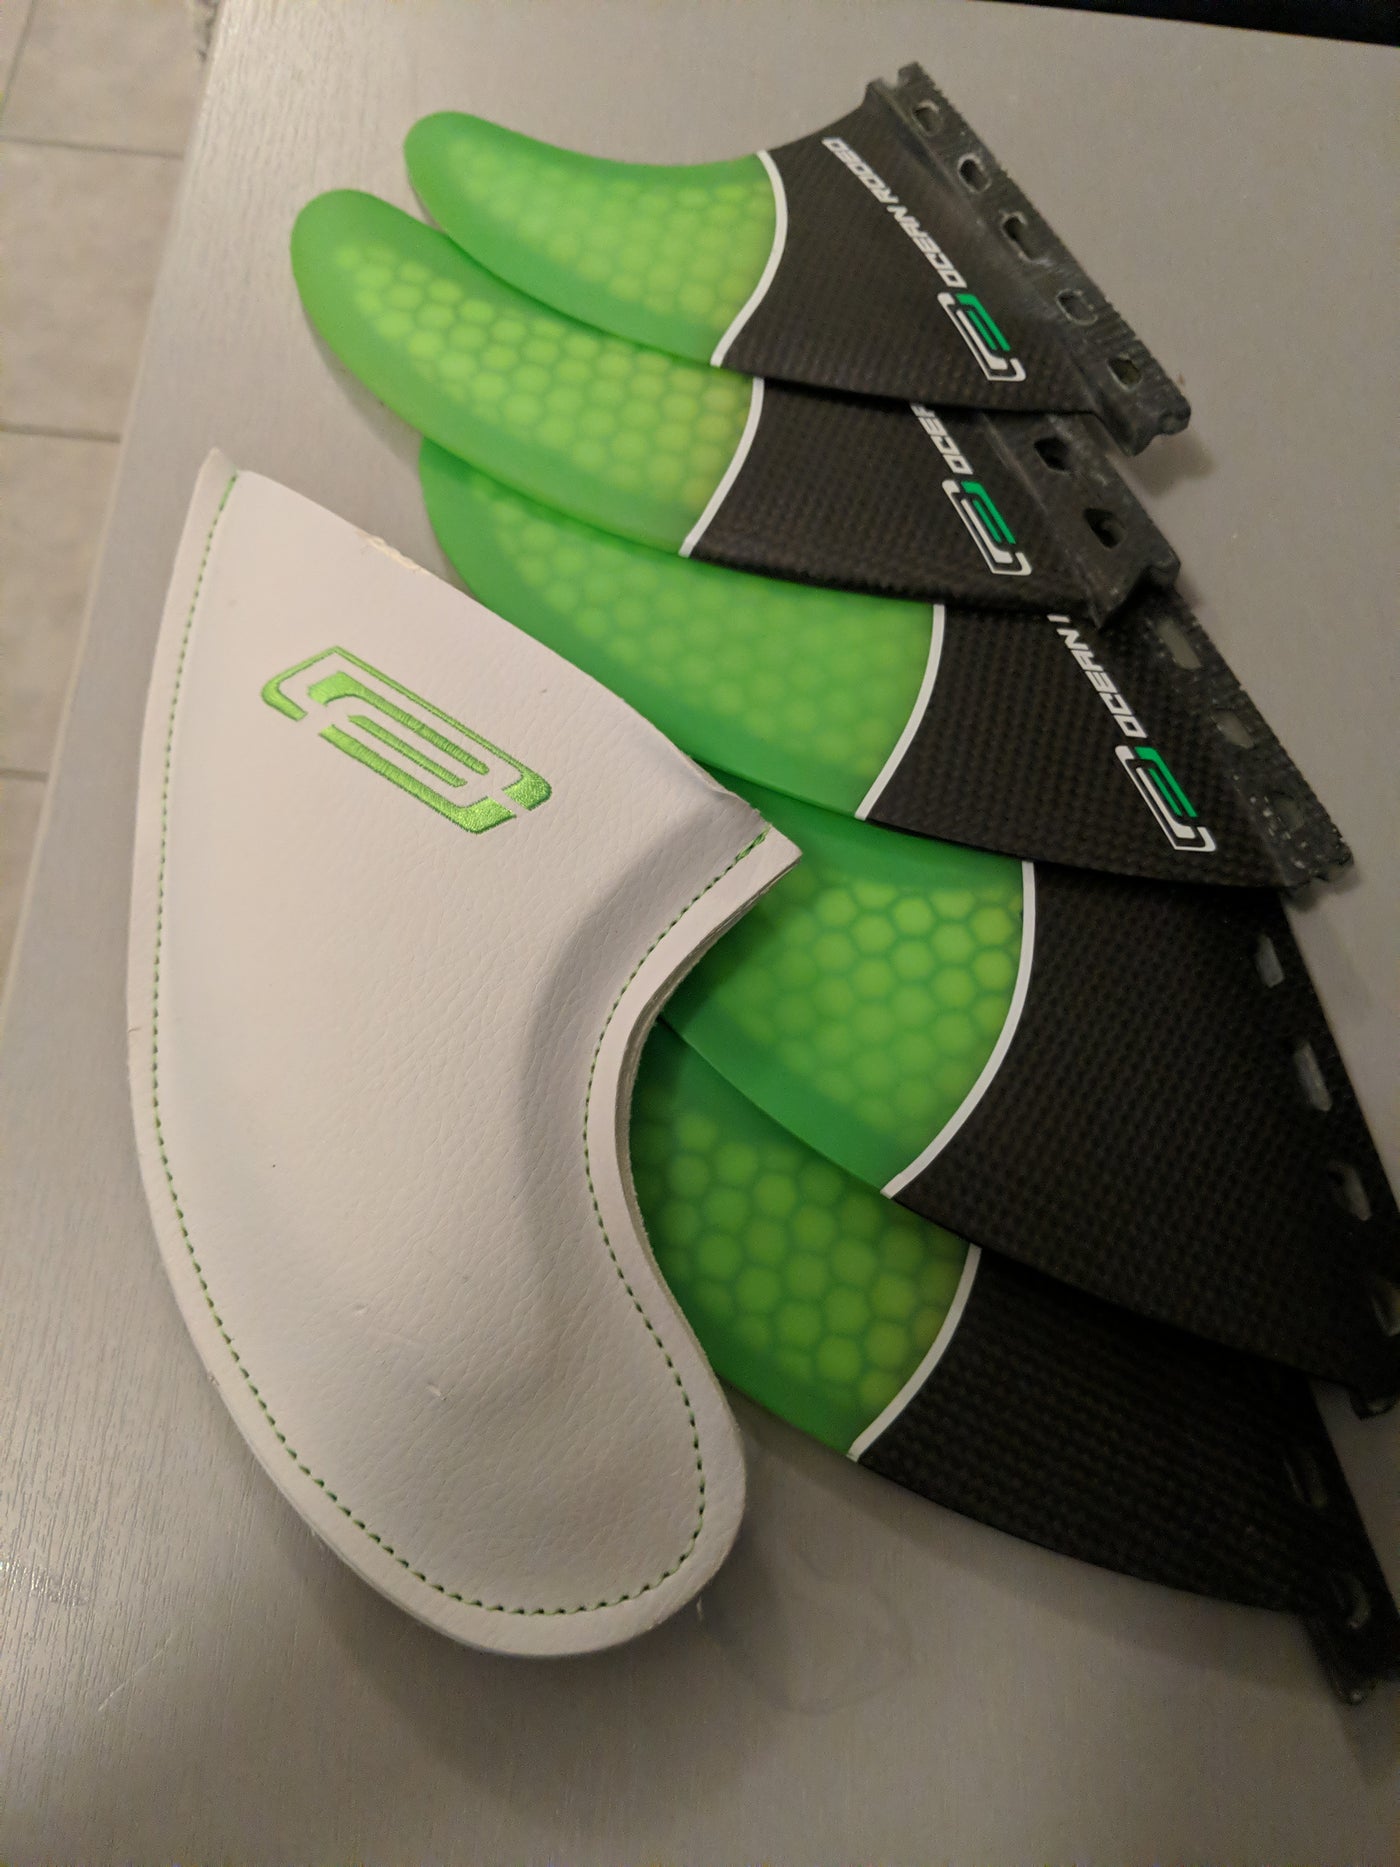 Replacement 5 fin set